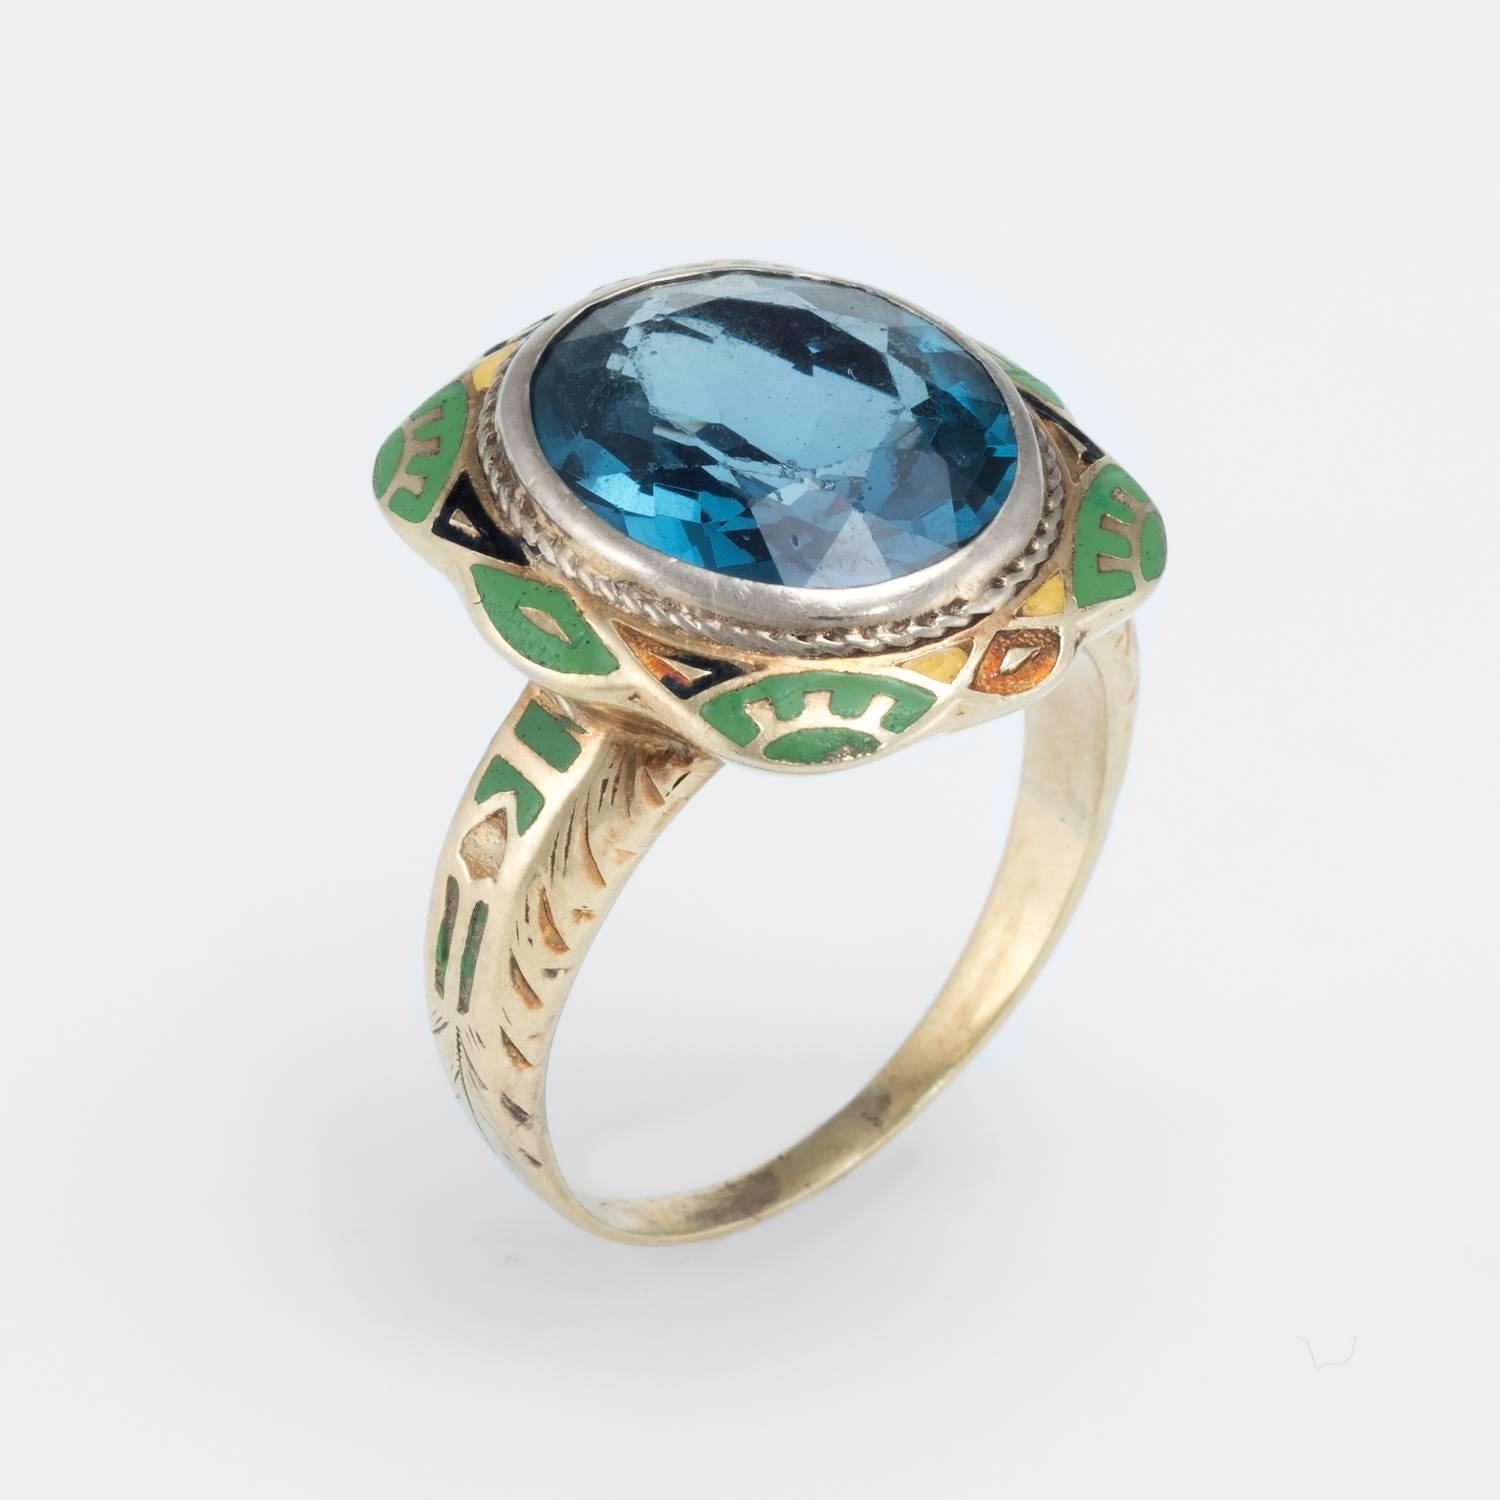 Overview:

Vintage Art Deco era enamel cocktail ring (circa 1920s to 1930s) crafted in 14 karat yellow & white gold.

Green and black enamel frames a faceted oval cut synthetic blue stone that measures 13mm x 11mm. Note: few light surface abrasions